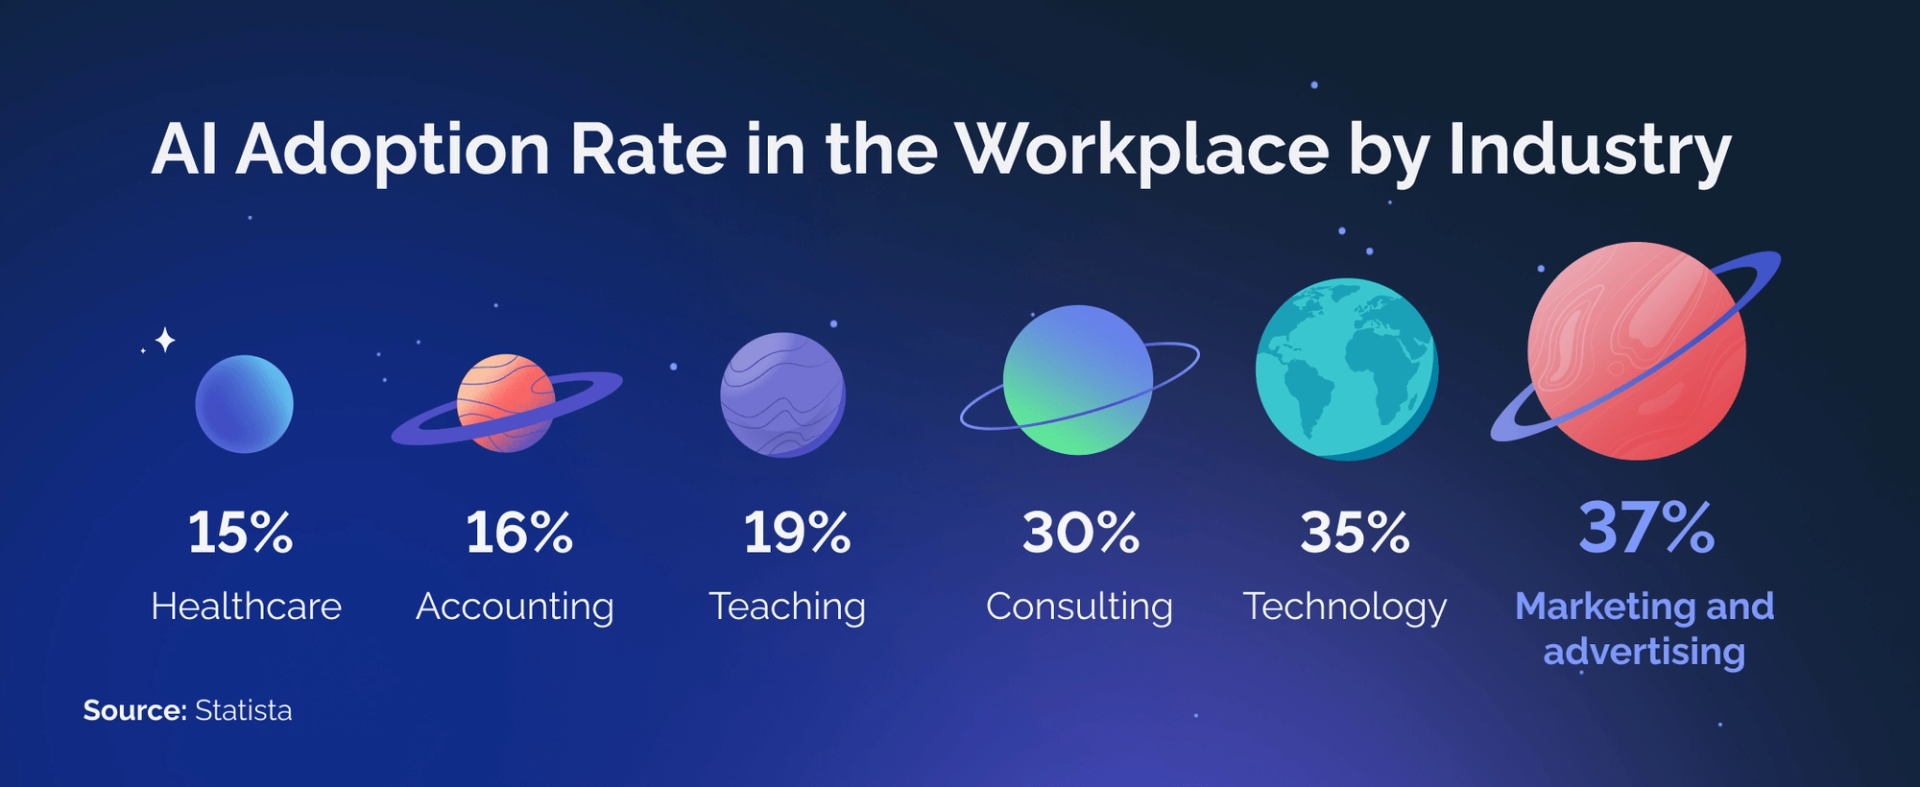 AI Adoption Rate in the Workplace by Industry